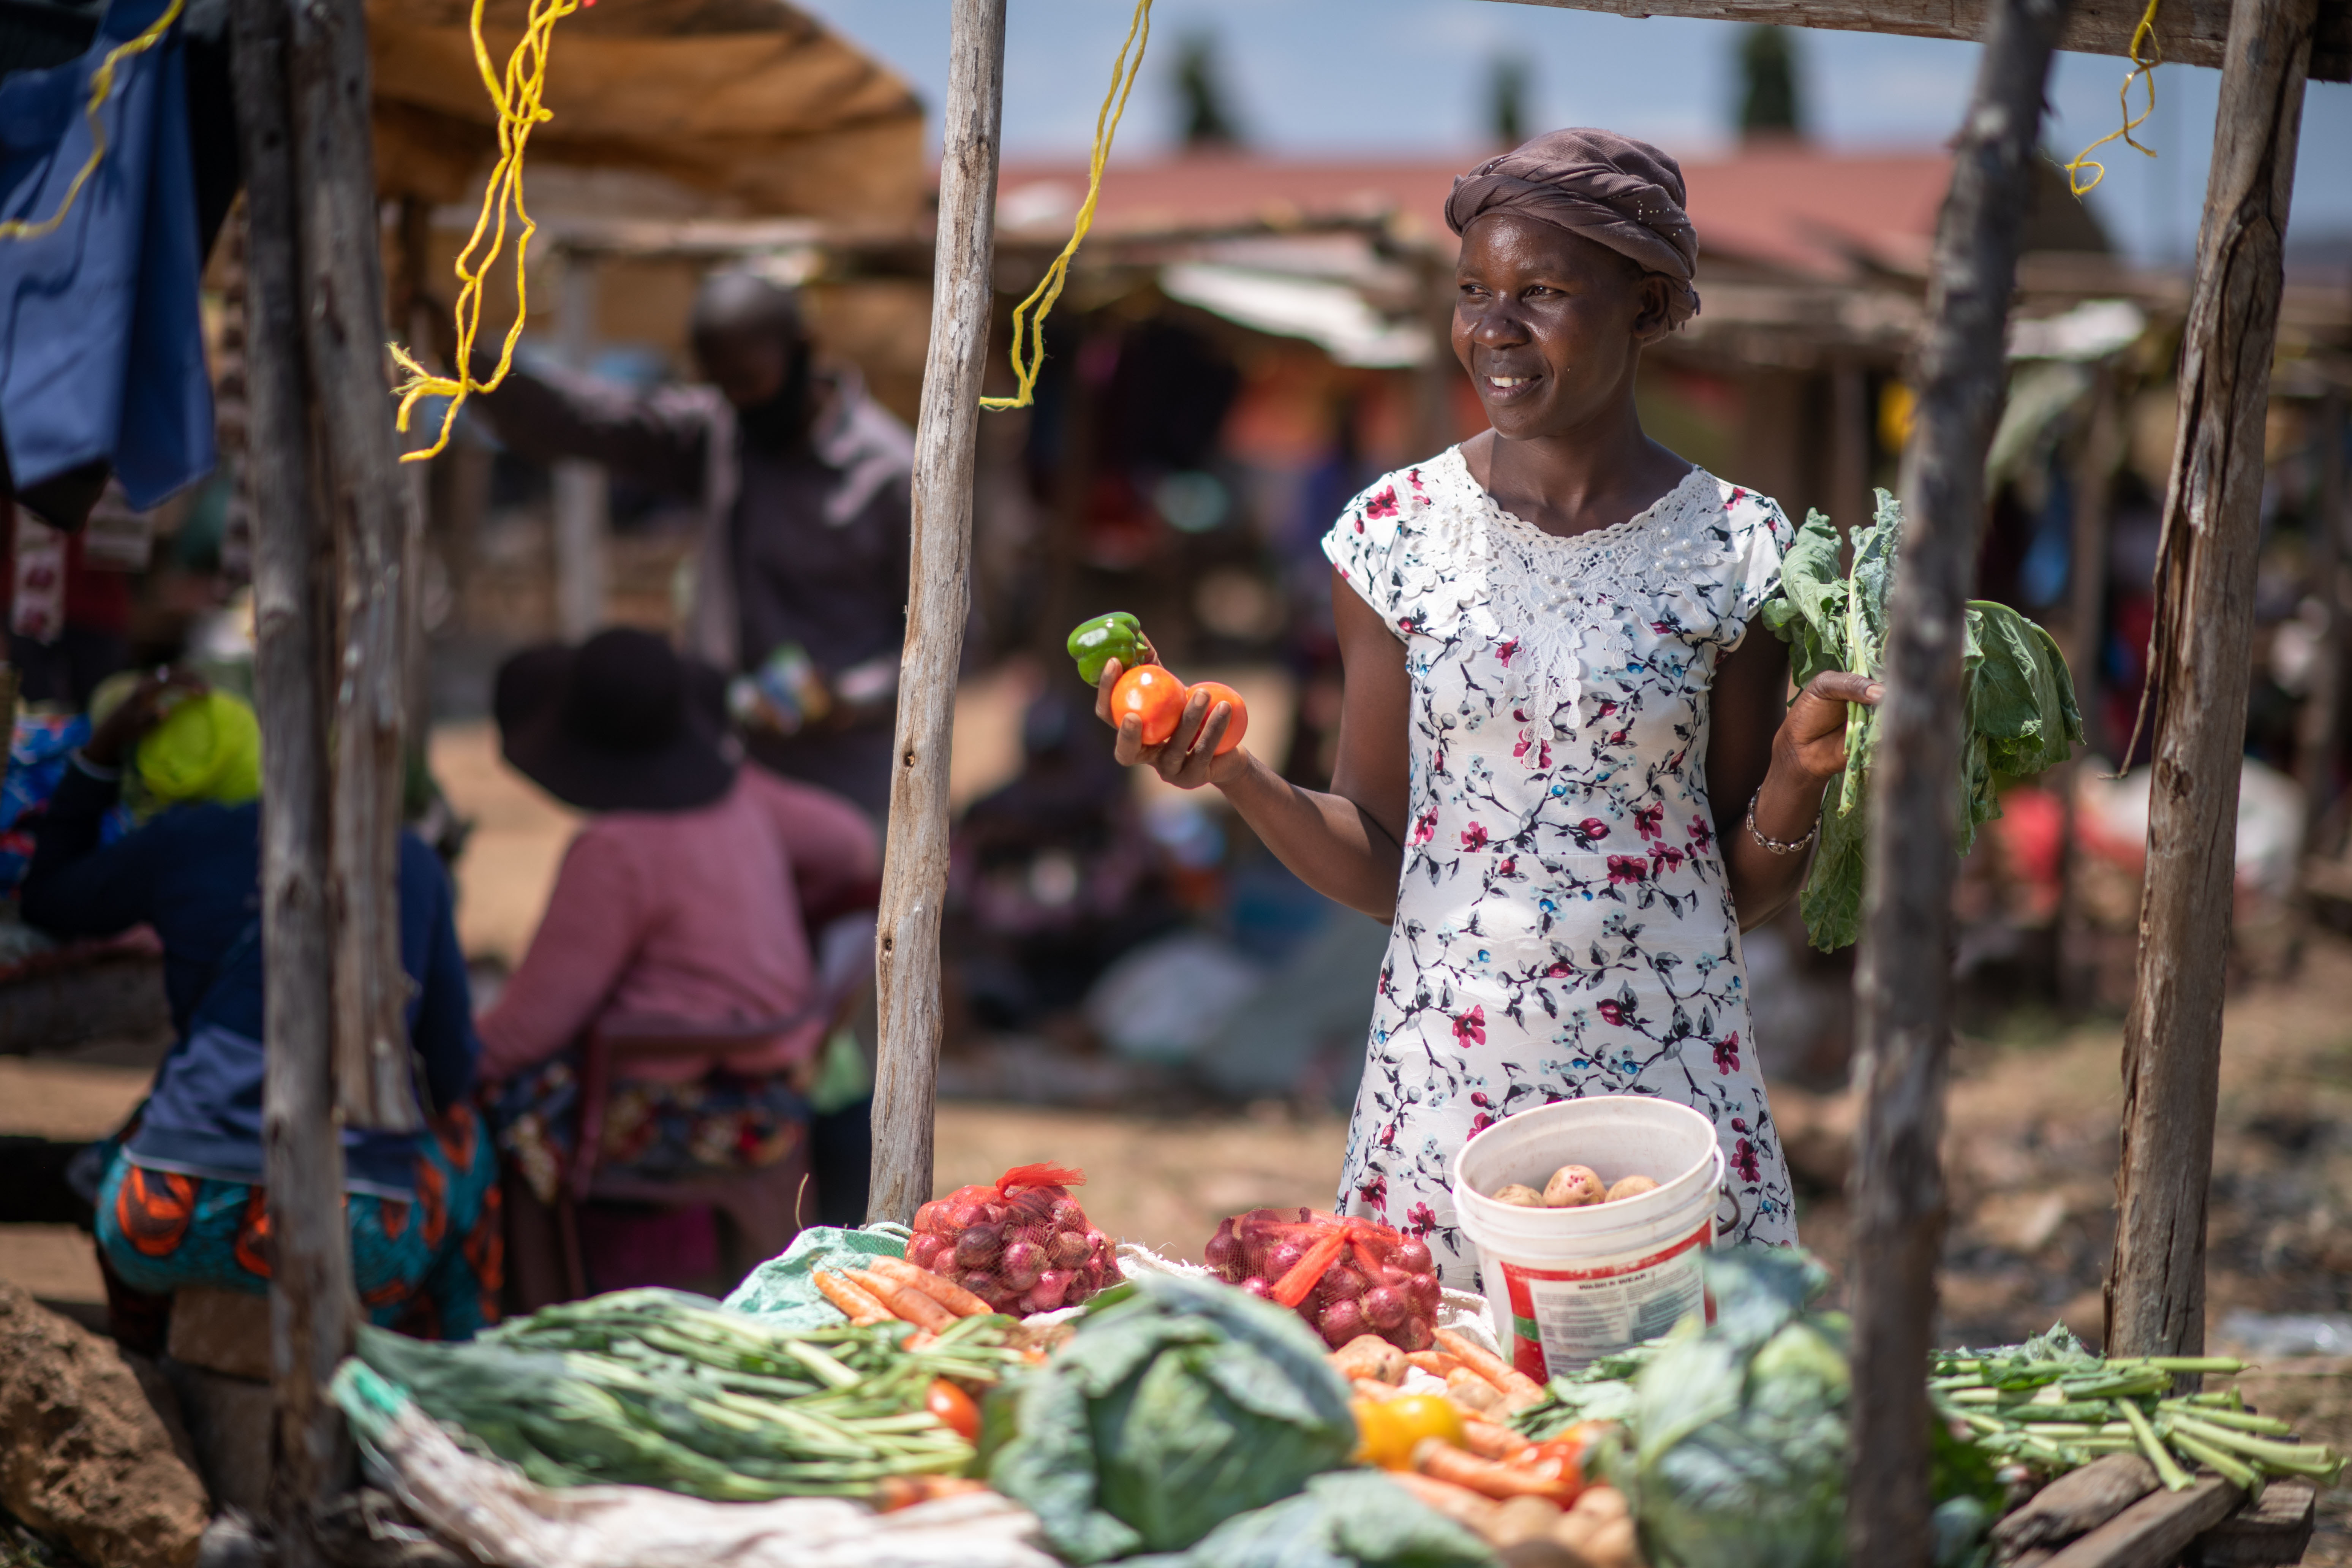 Picture of Agnes wearing a white, floral dress selling produce at a market.